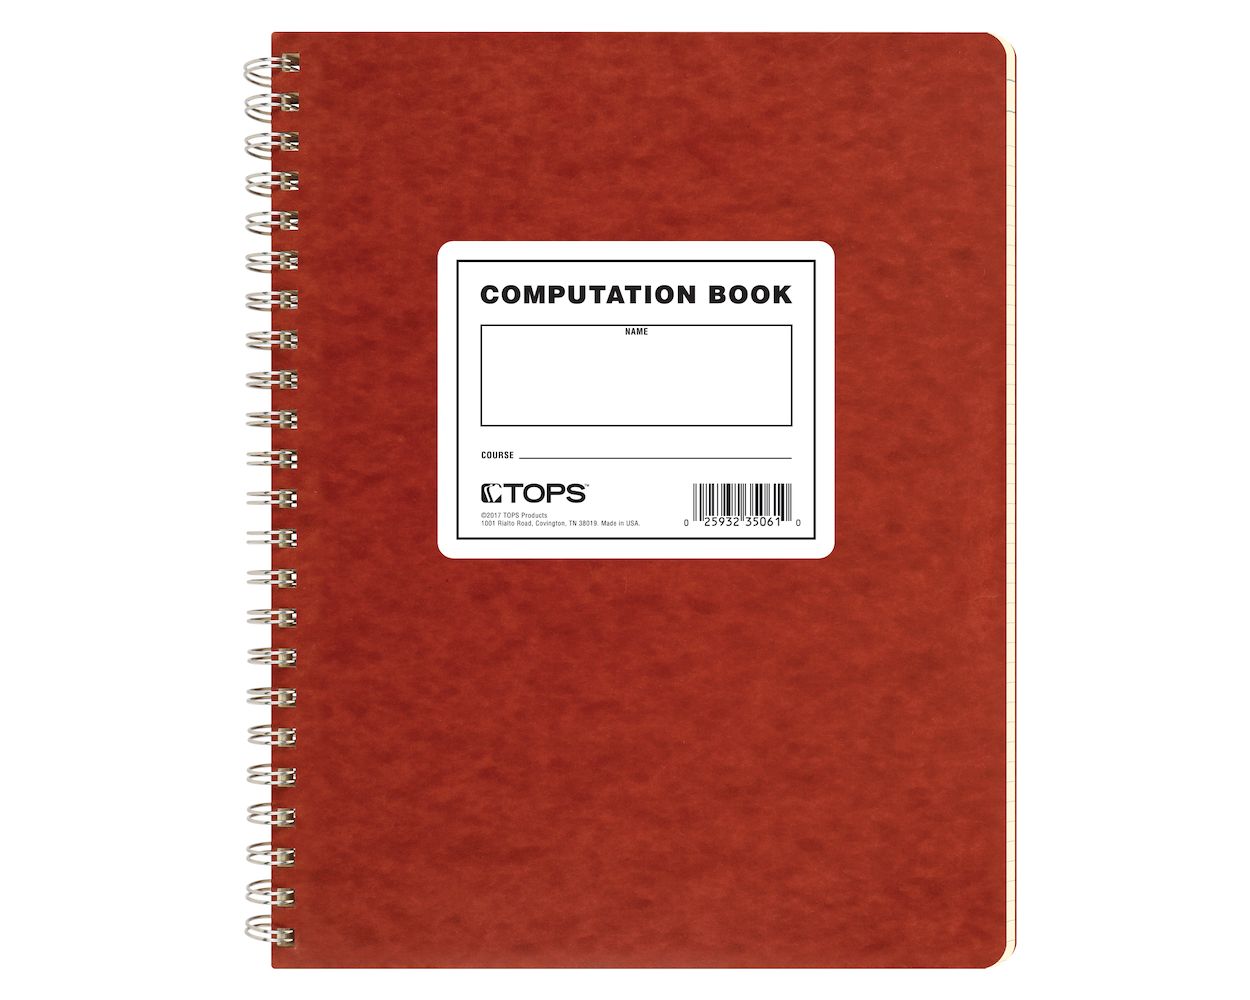 75 Sheets Brown National Brand Computation Notebook 1 Pack 43648 Green Paper 4 X 4 Quad 11.75 x 9.25 Inches 